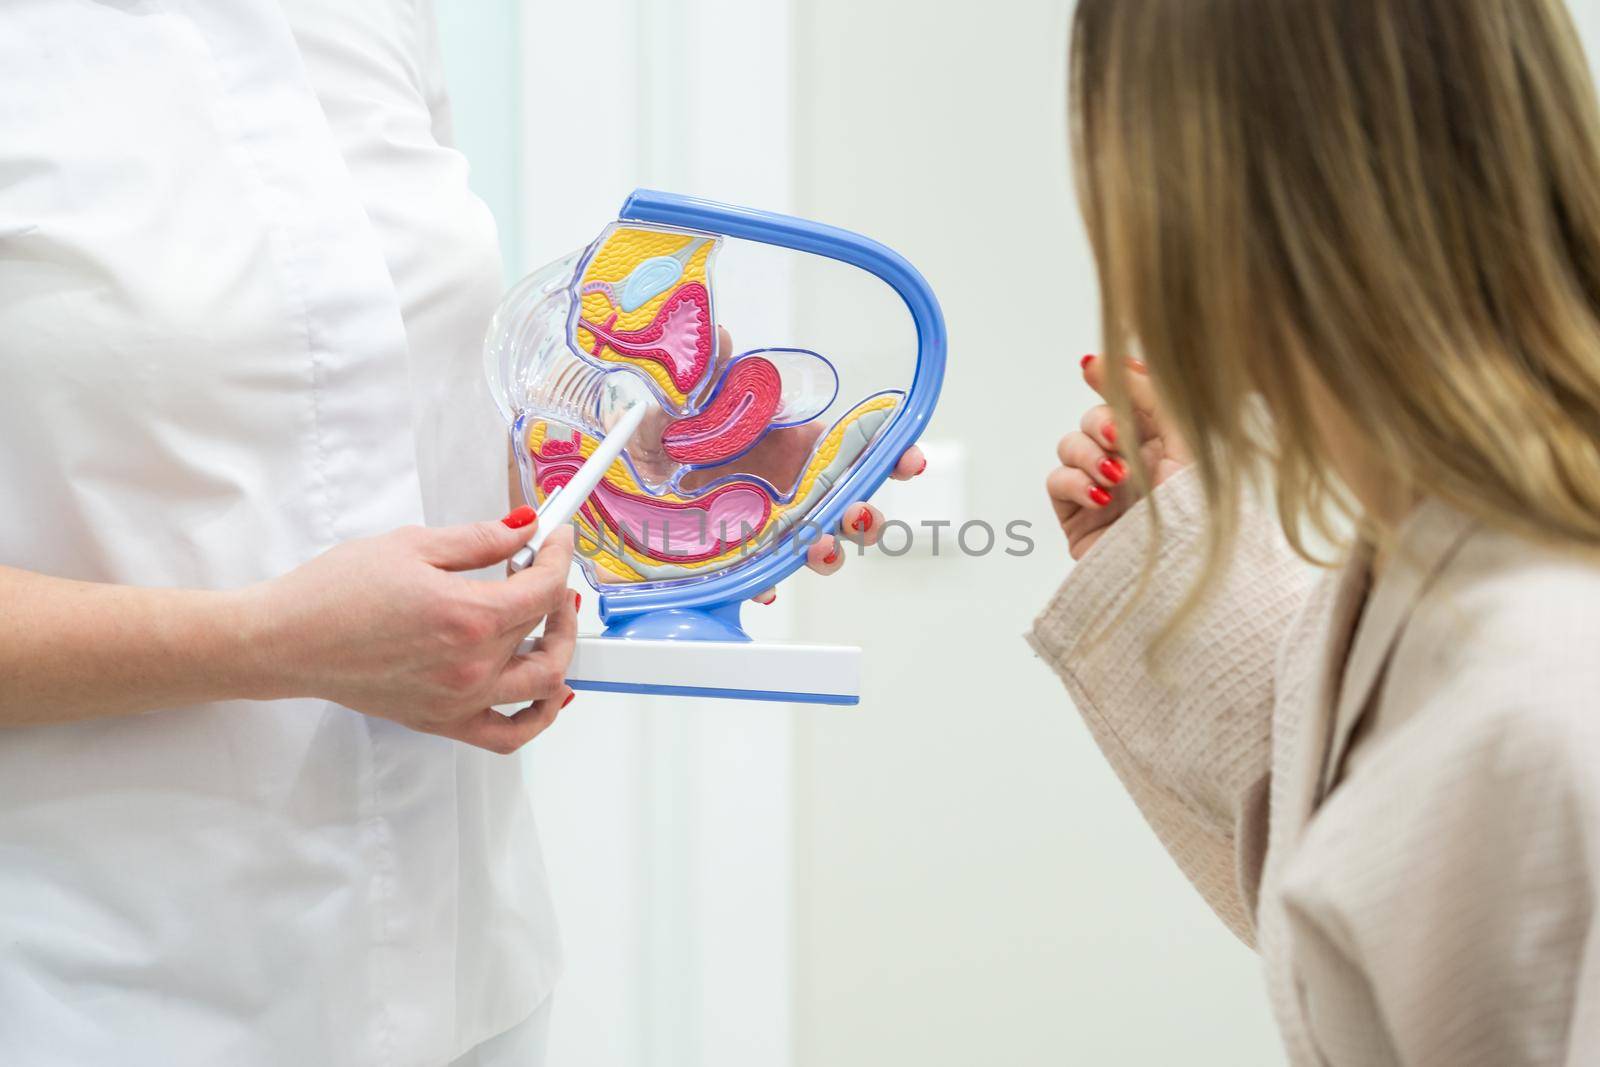 Doctor consulting patient using uterus anatomy model by Mariakray